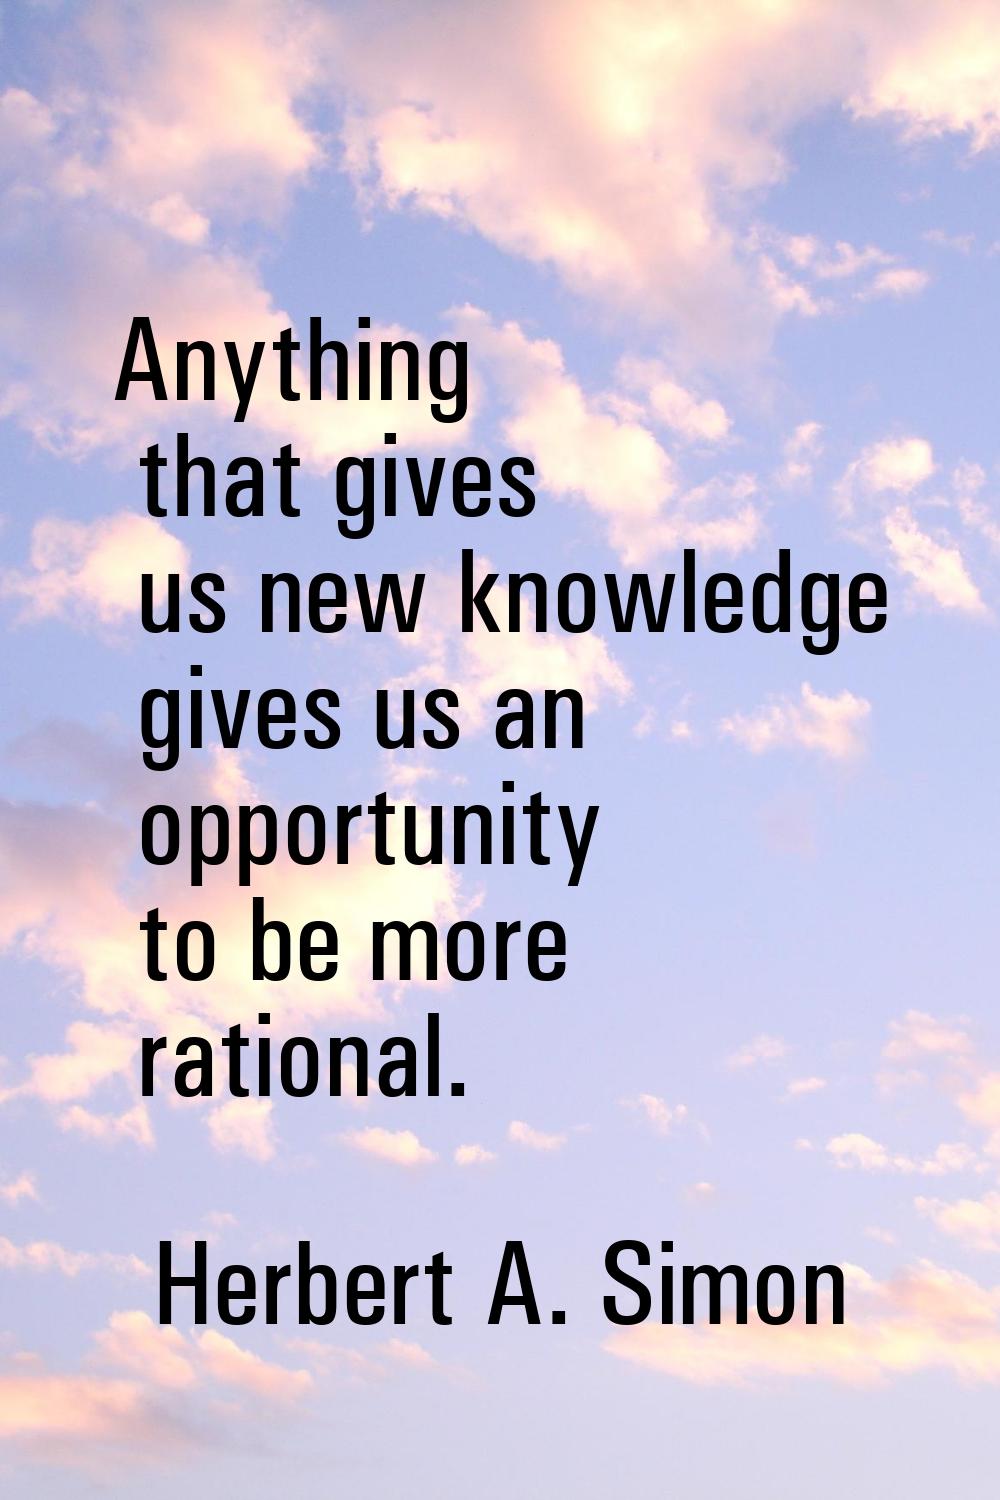 Anything that gives us new knowledge gives us an opportunity to be more rational.